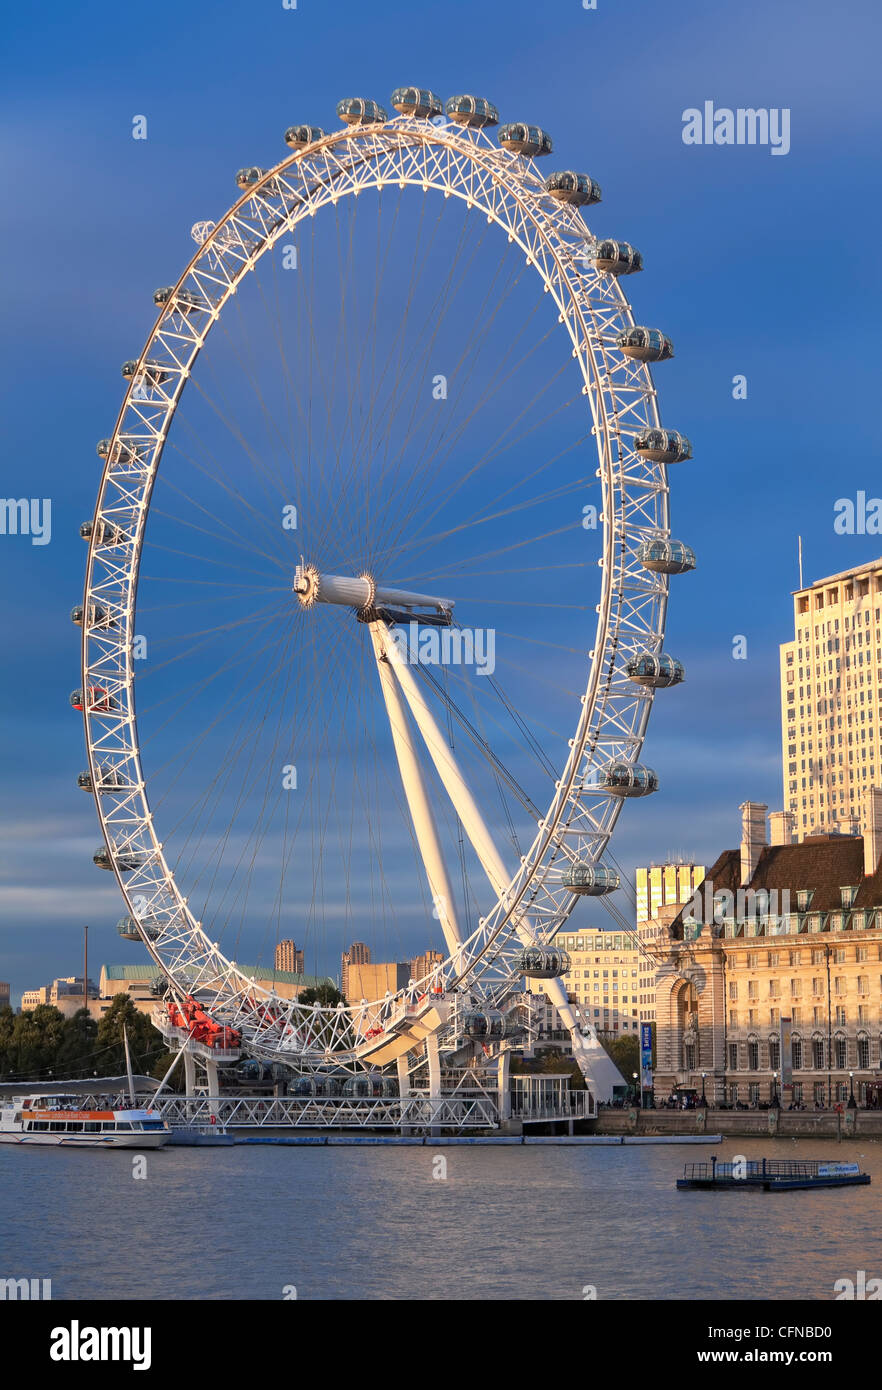 The Millennium Wheel (London Eye) with the River Thames in the foreground, London, England, United Kingdom, Europe Stock Photo